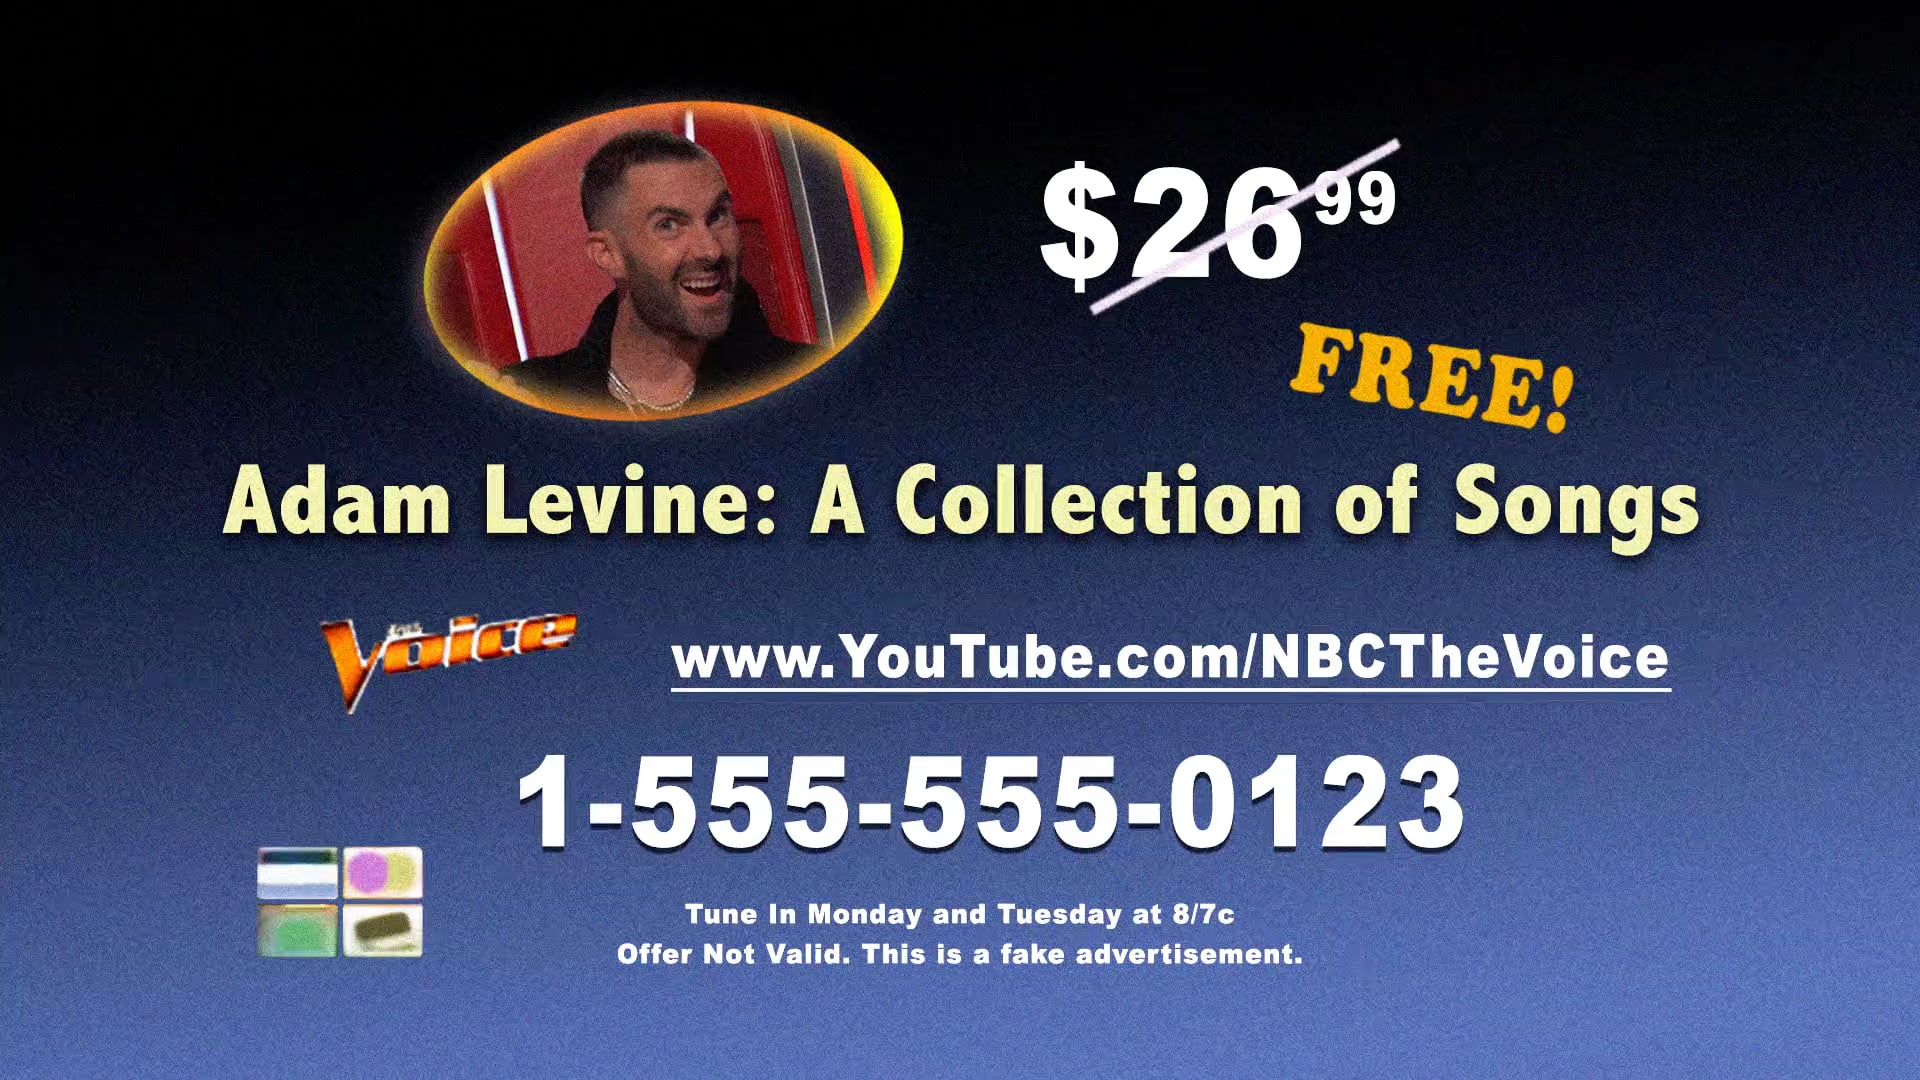 The Voice: Adam Levine "A Collection of Songs"